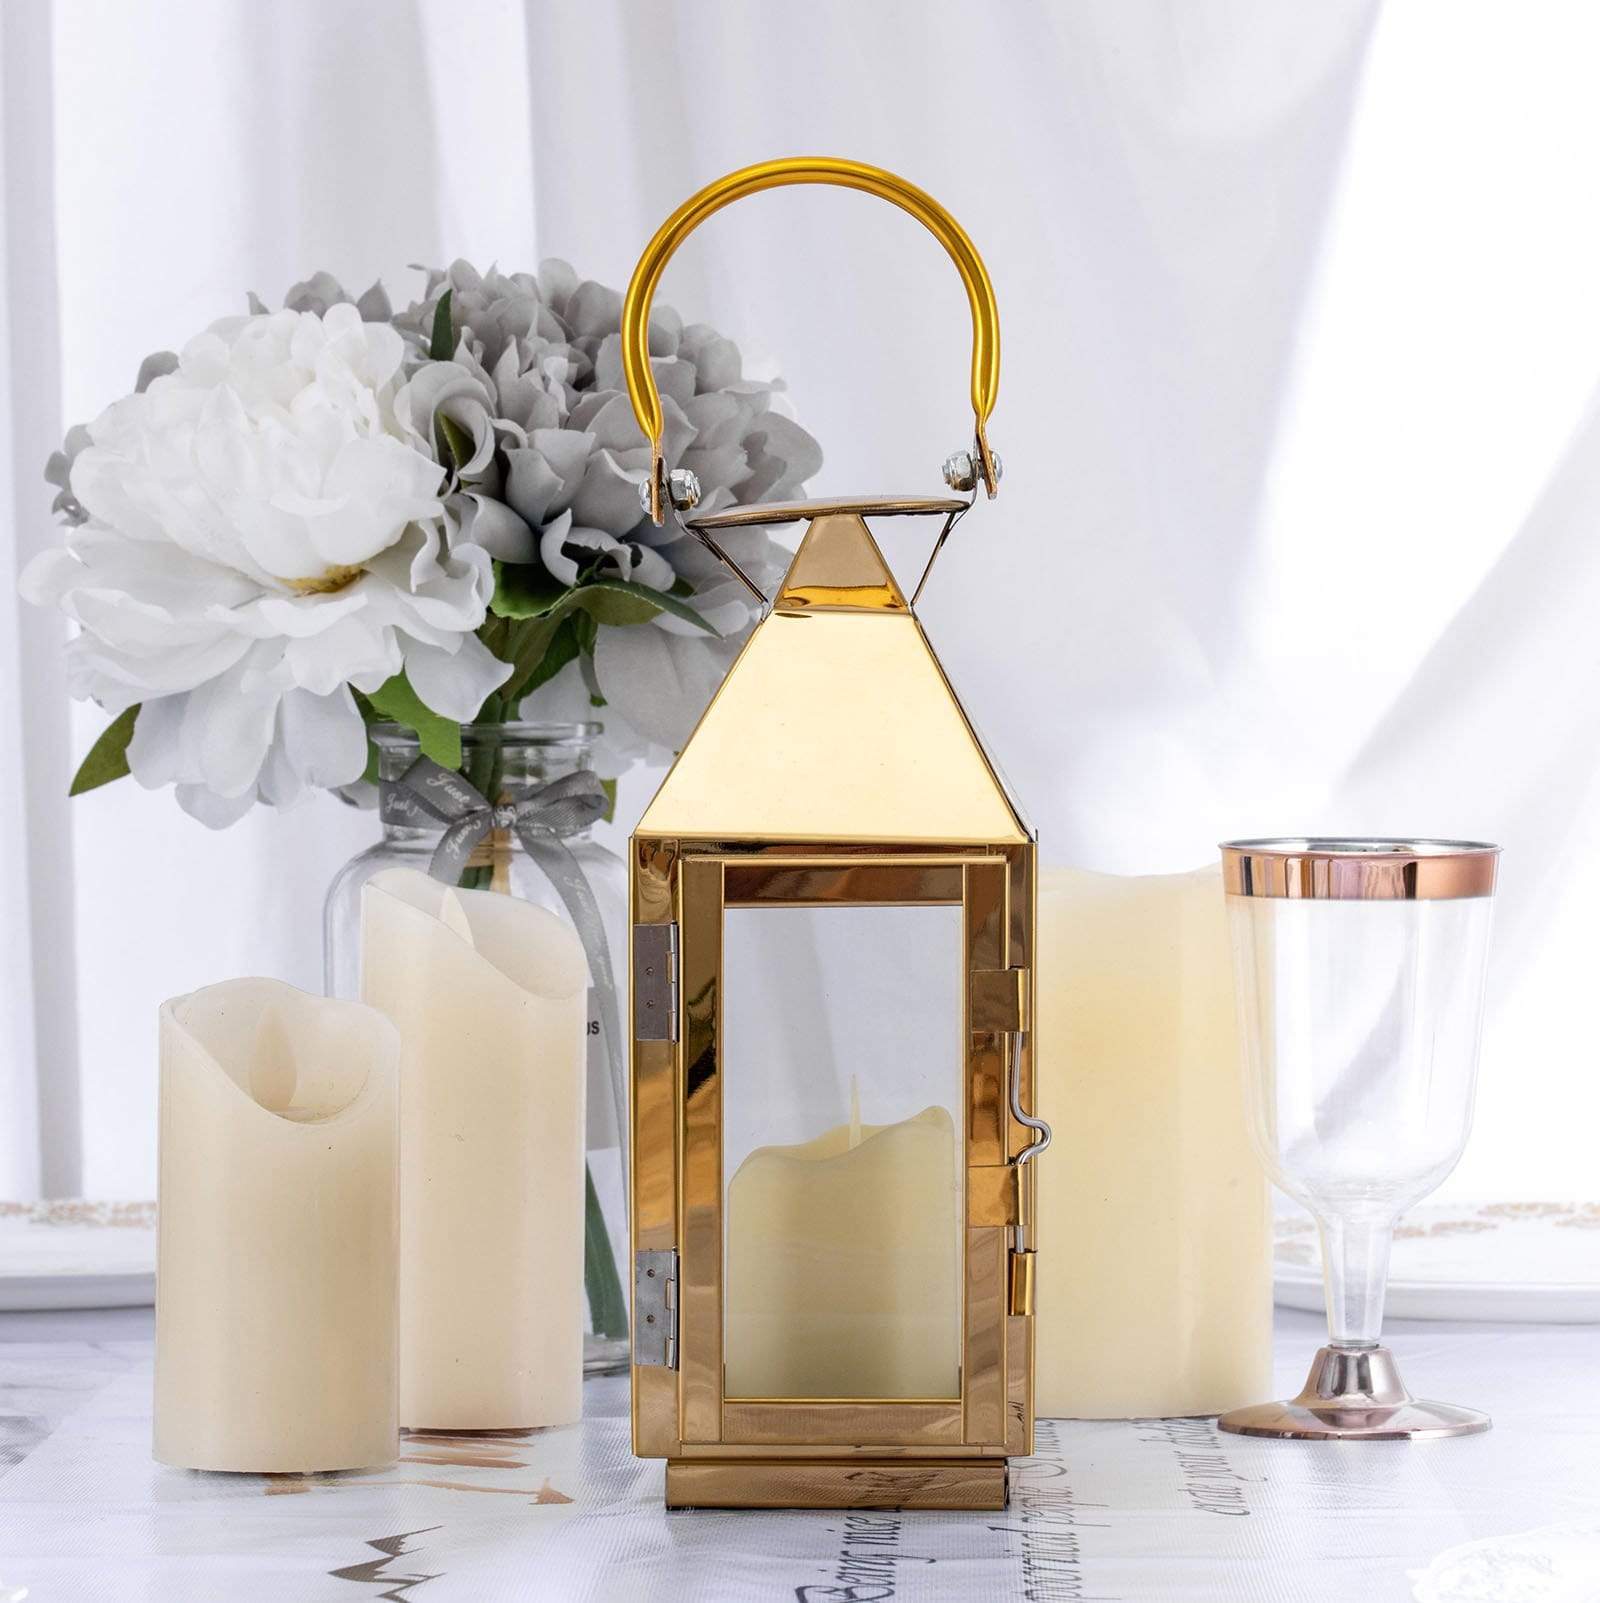 8 in tall Metal Lantern Candle Holder Centerpiece